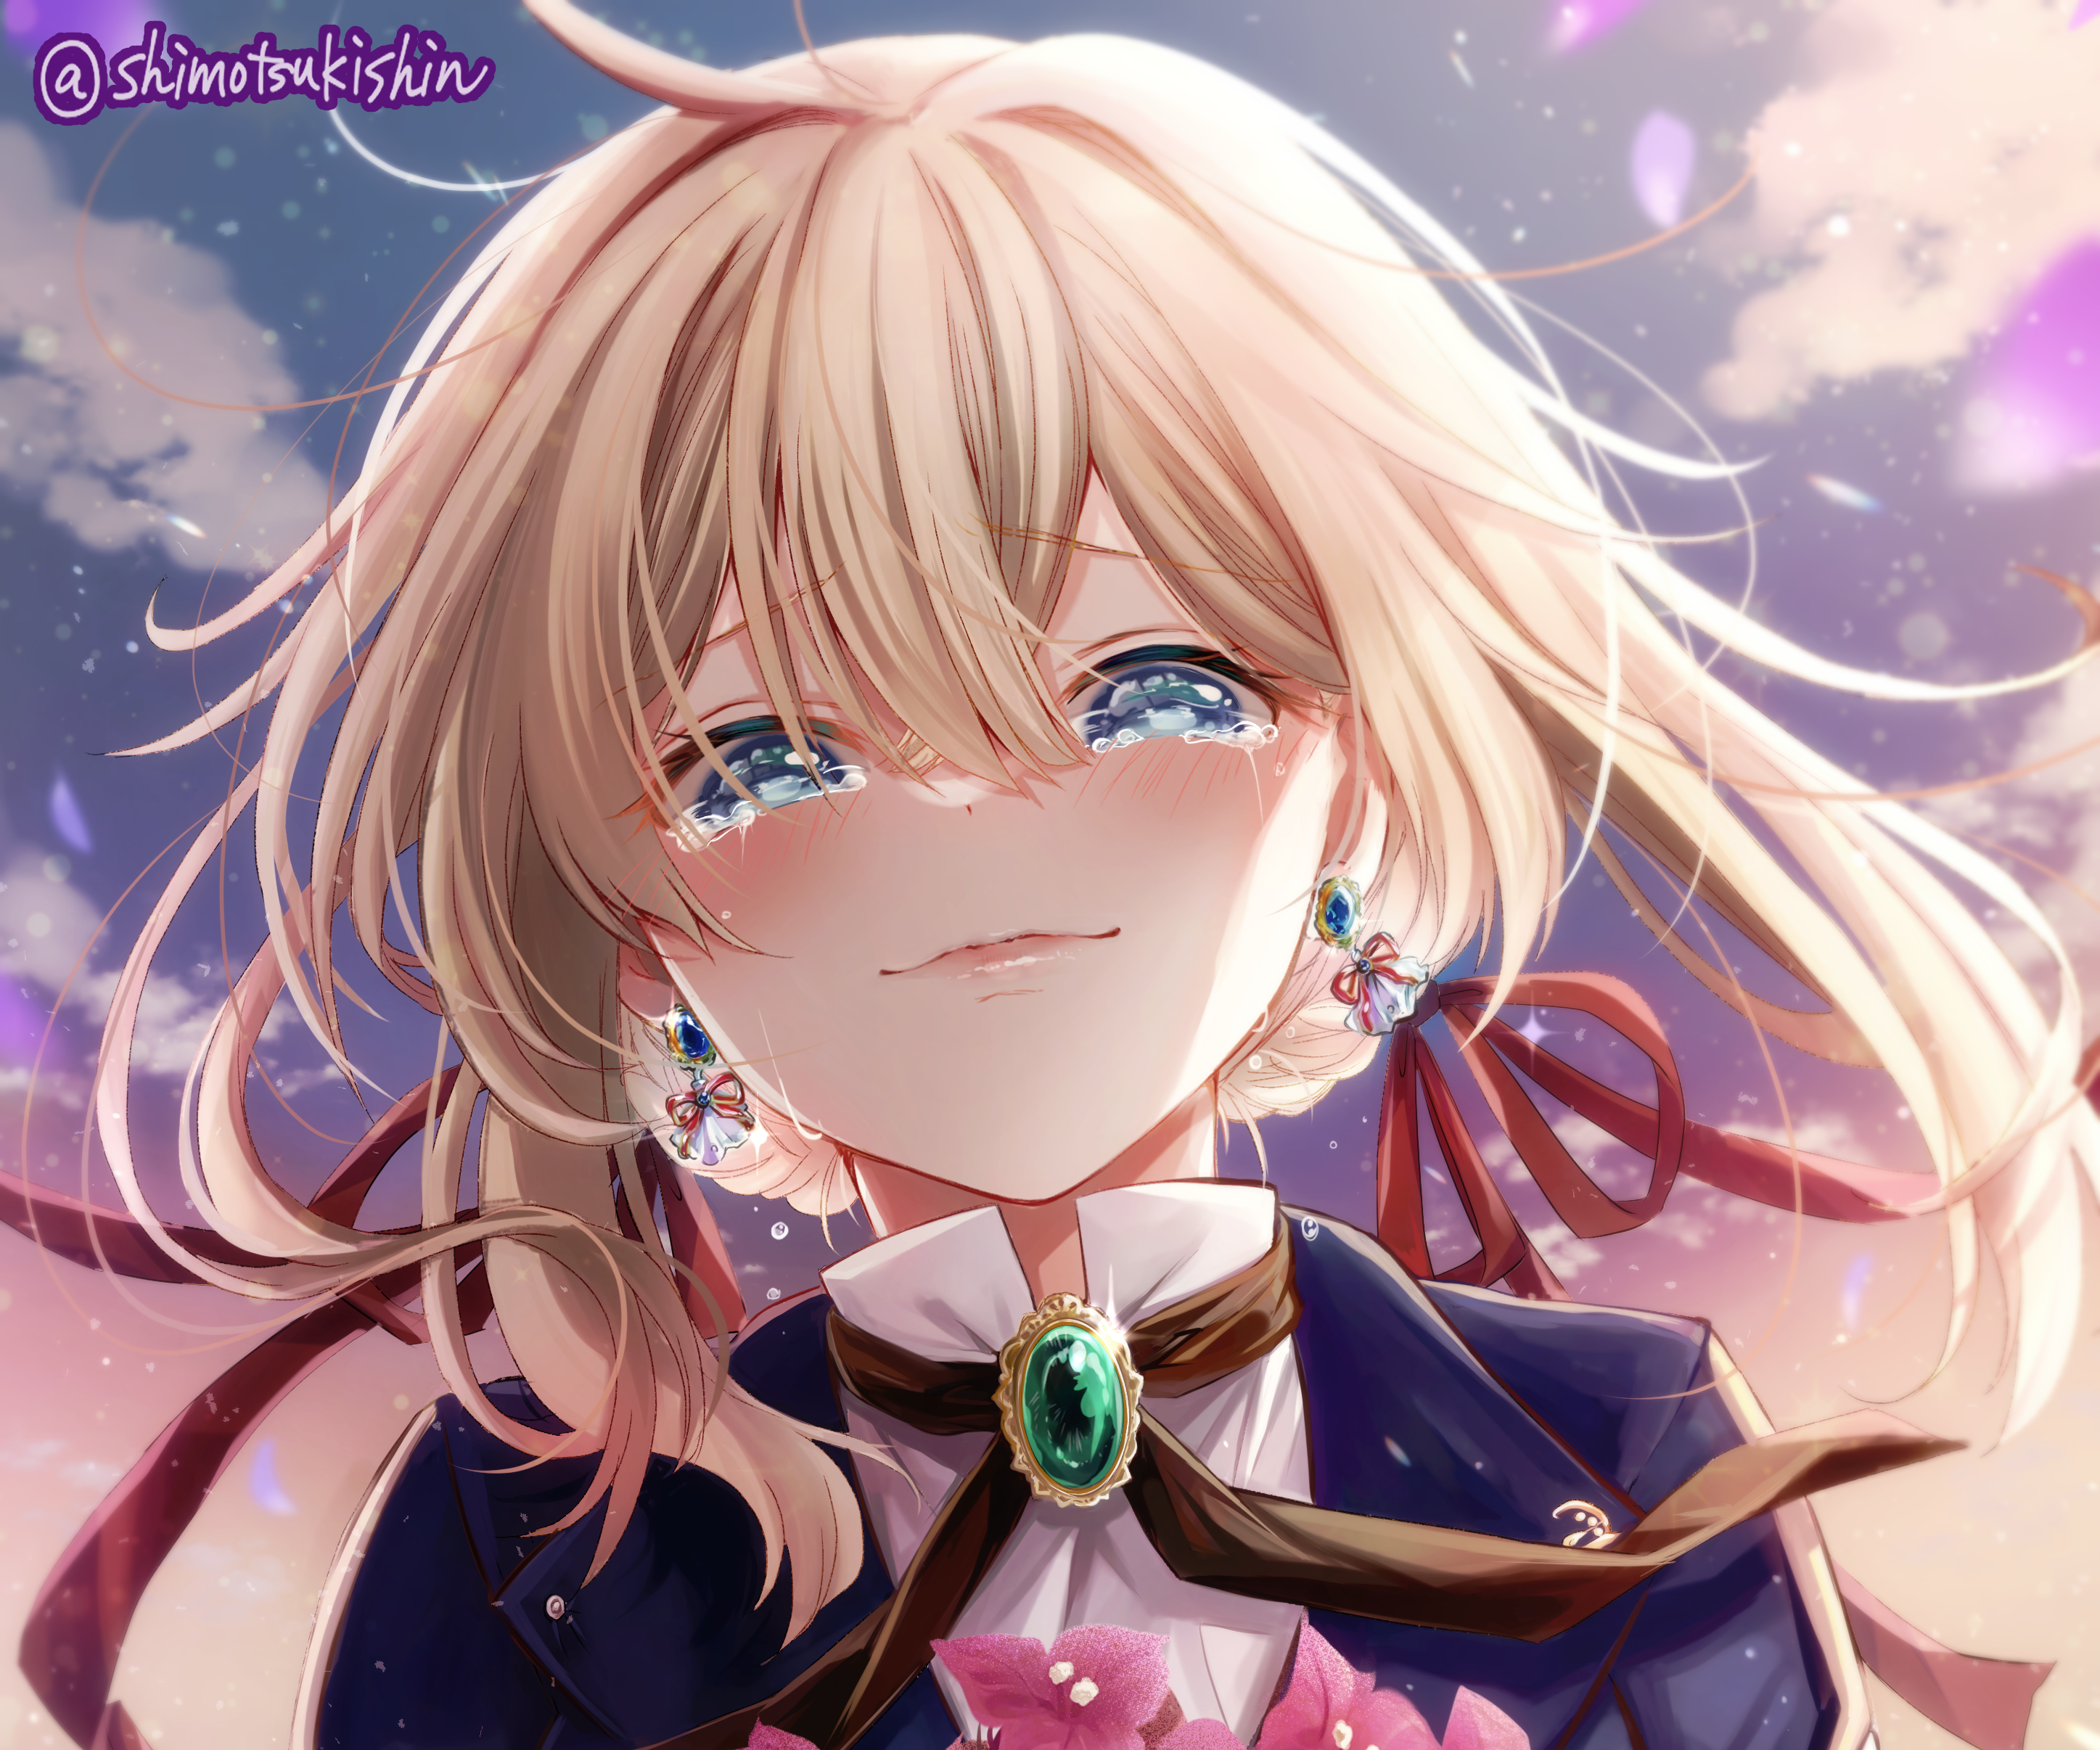 406147 anime anime girl Violet Evergarden wallpaper free download  1703x3000  Rare Gallery HD Wallpapers